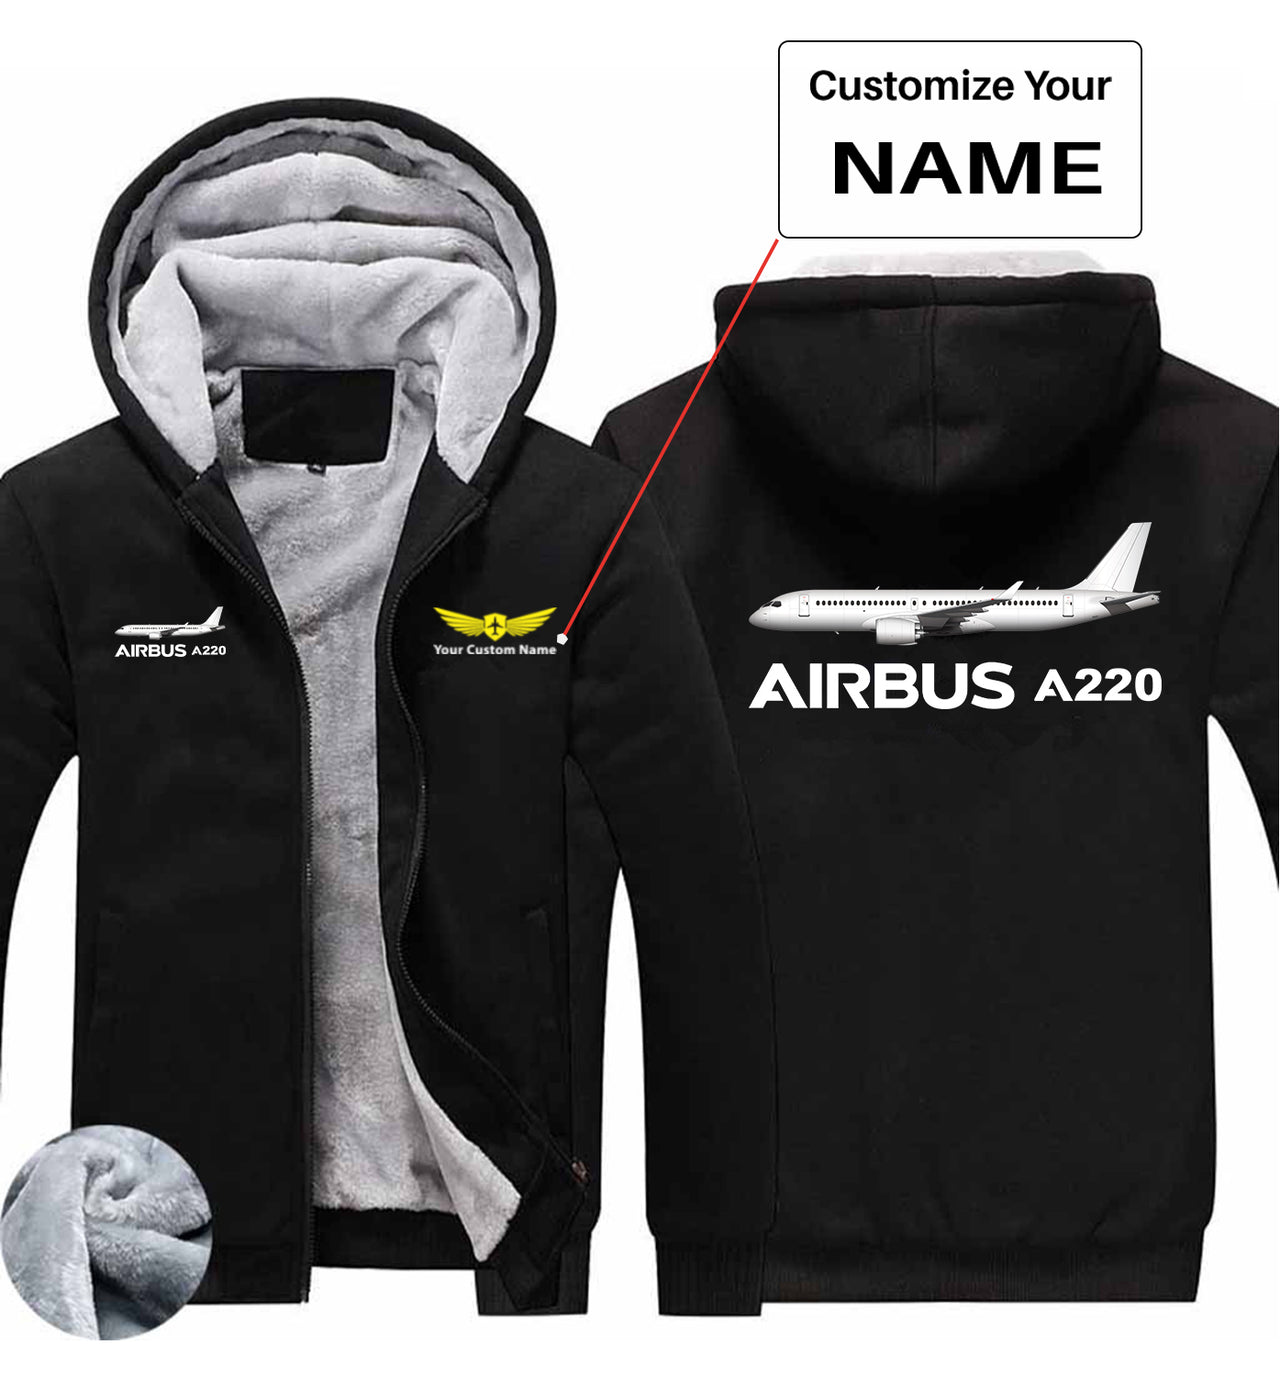 The Airbus A220 Designed Zipped Sweatshirts